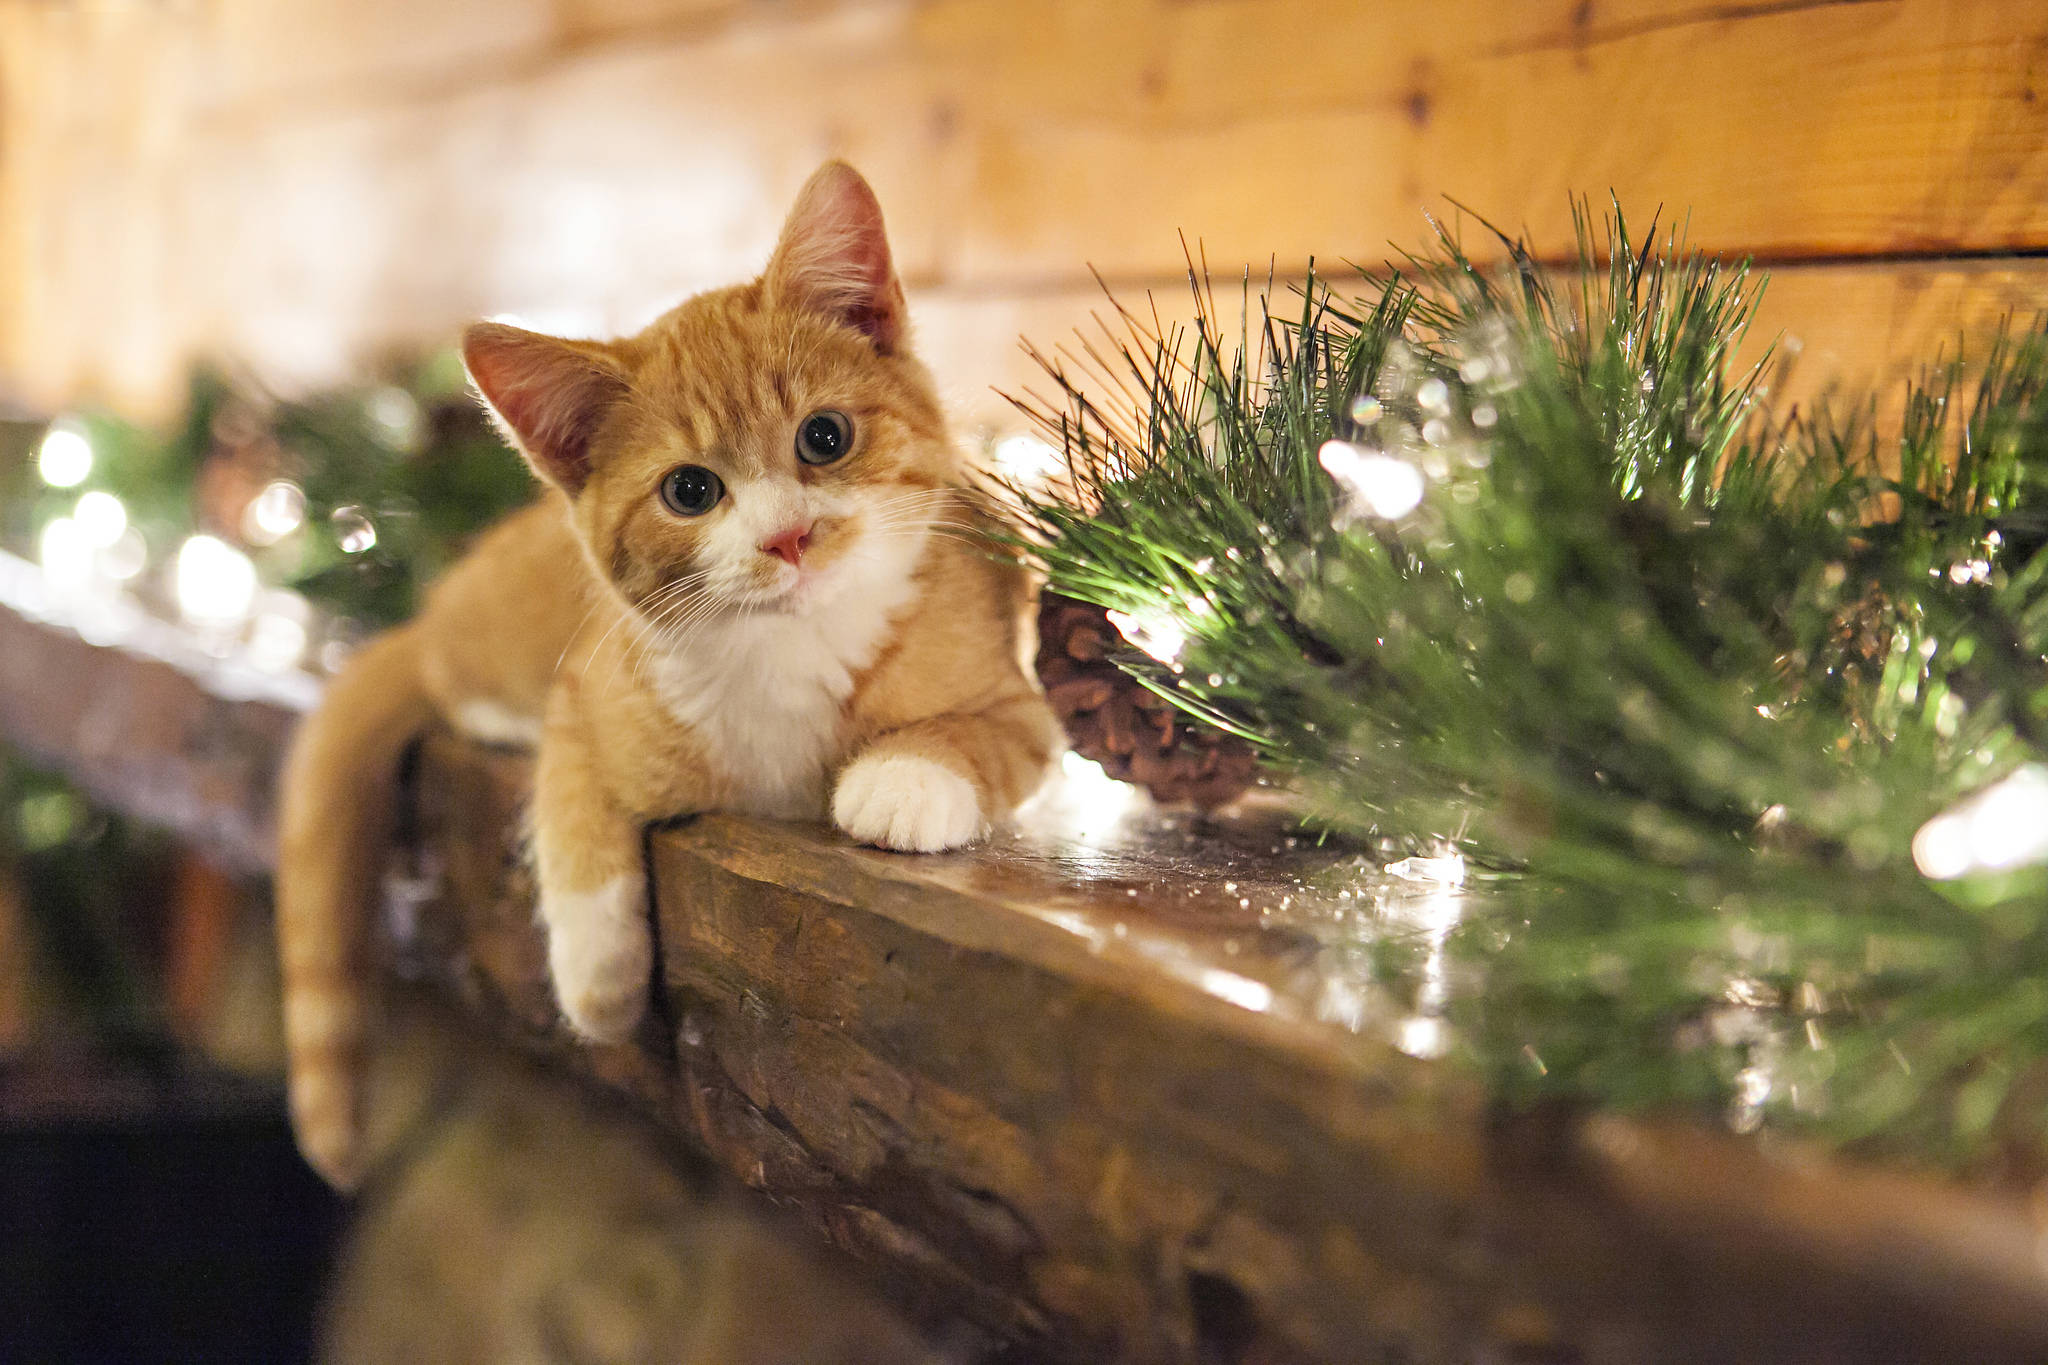 Cute Kitty With Christmas Ornaments